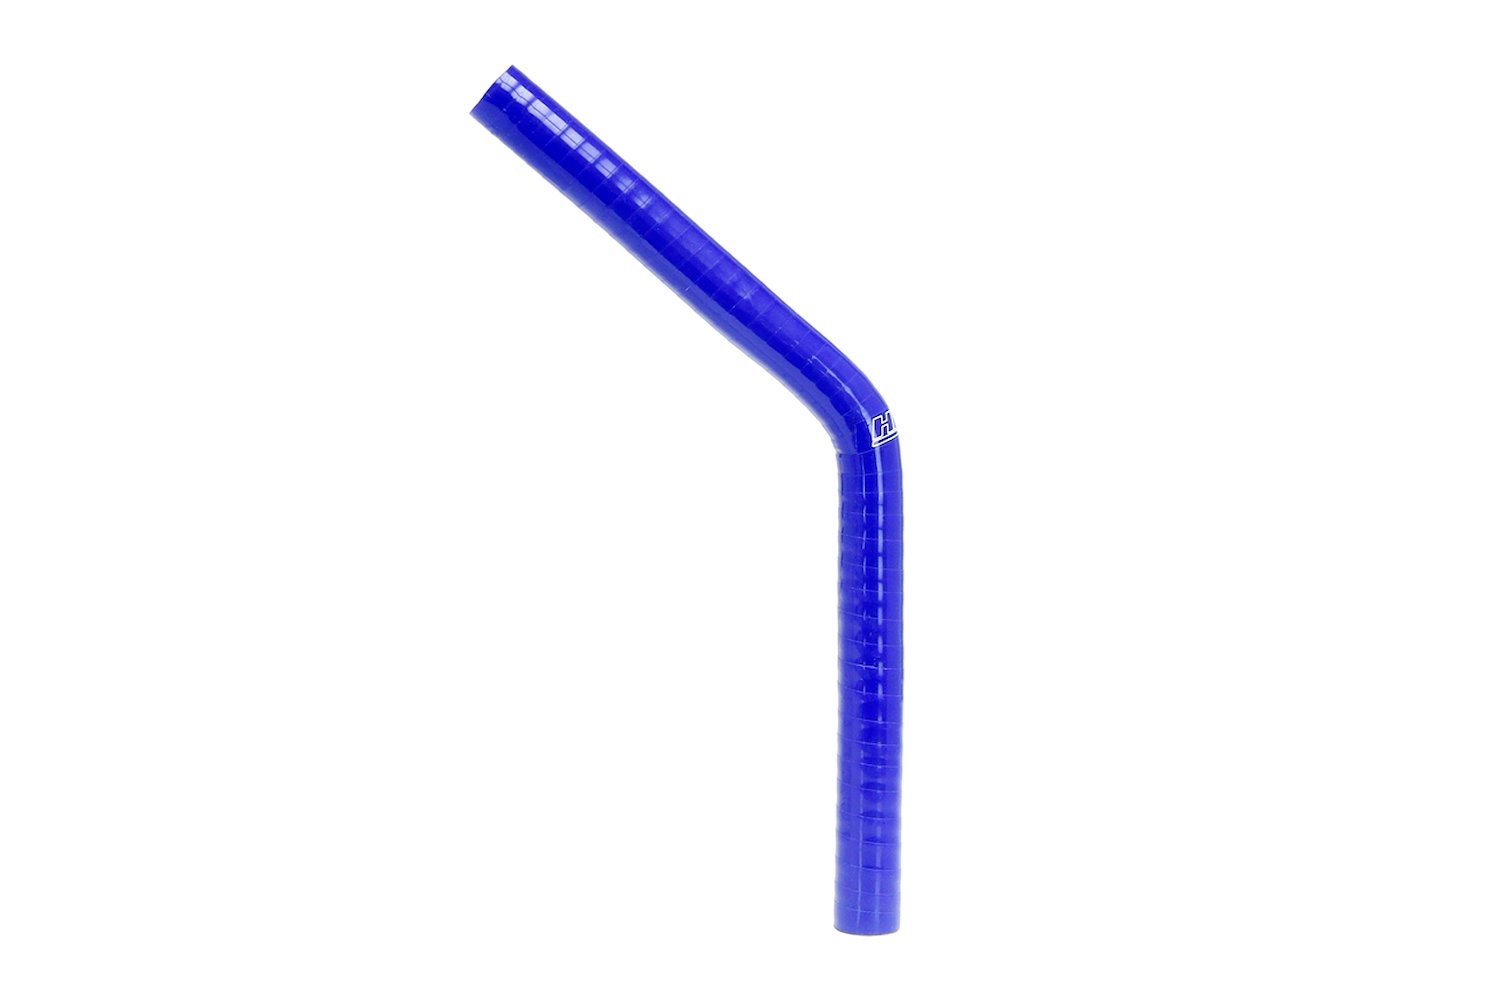 HTSEC45-100-BLUE Silicone 45-Degree Elbow Coupler Hose, High-Temp 4-Ply Reinforced, 1 in. ID, Blue